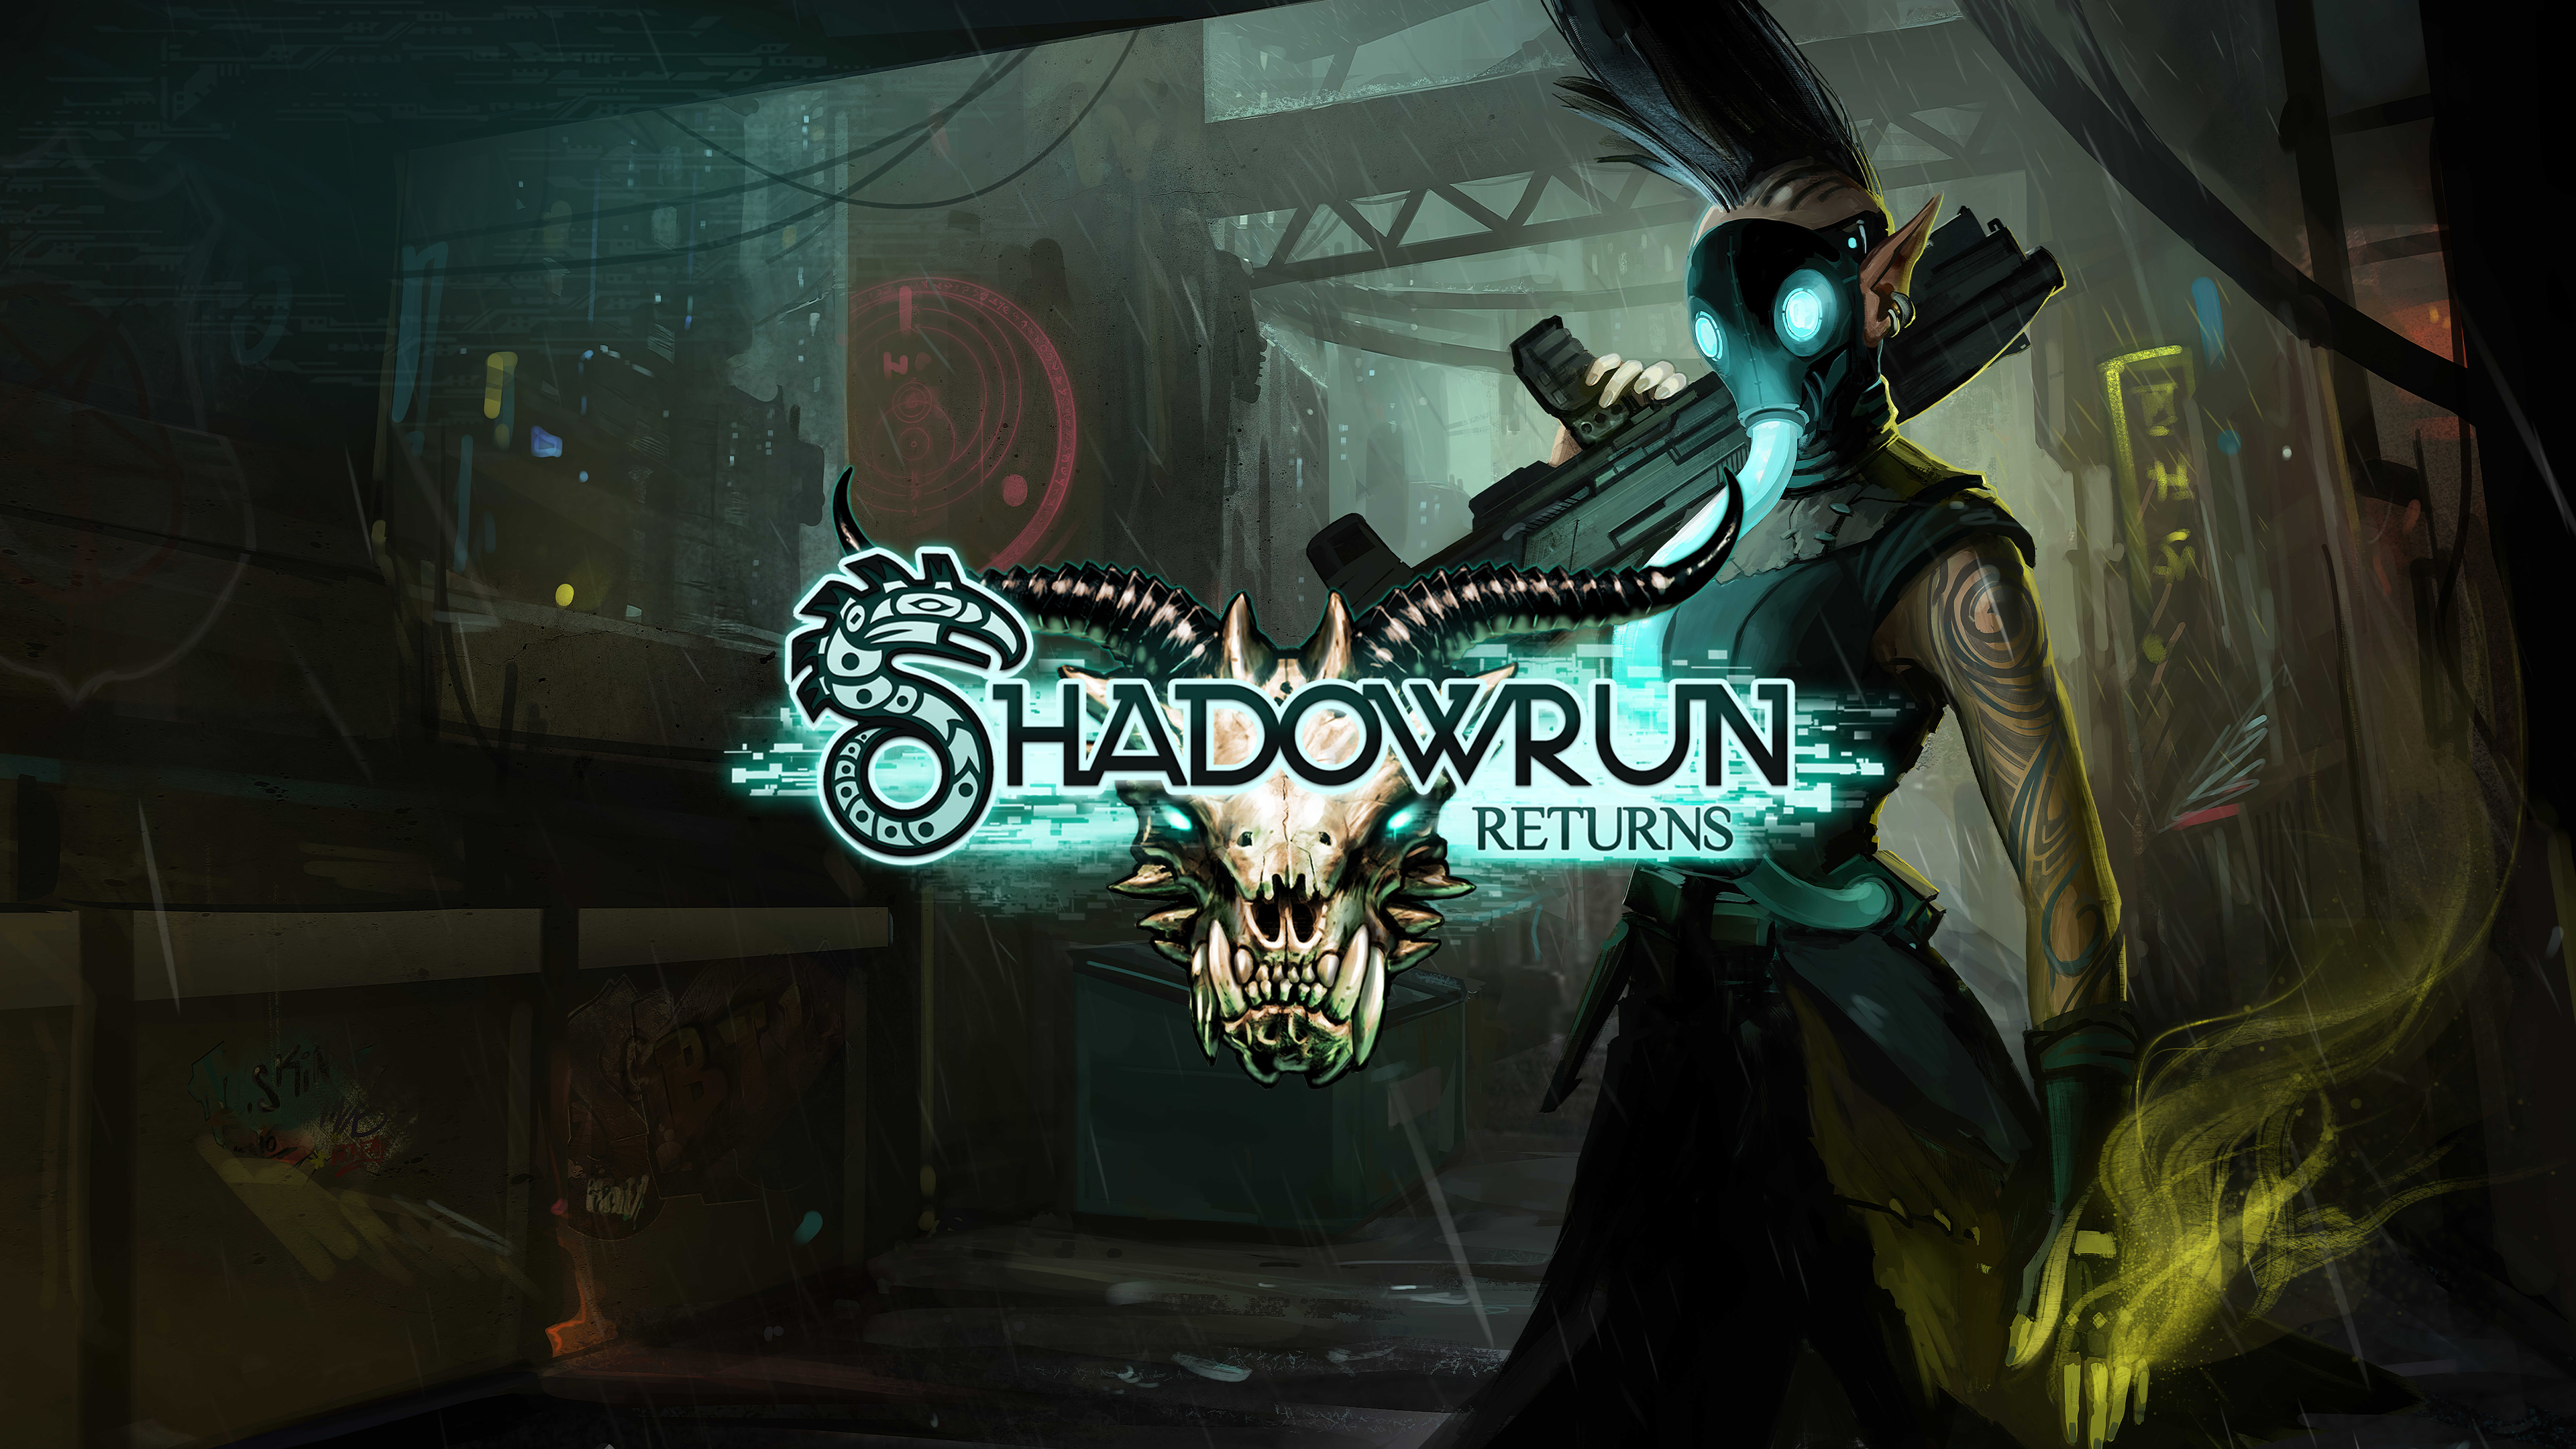 Shadowrun Collection - Release Trailer 